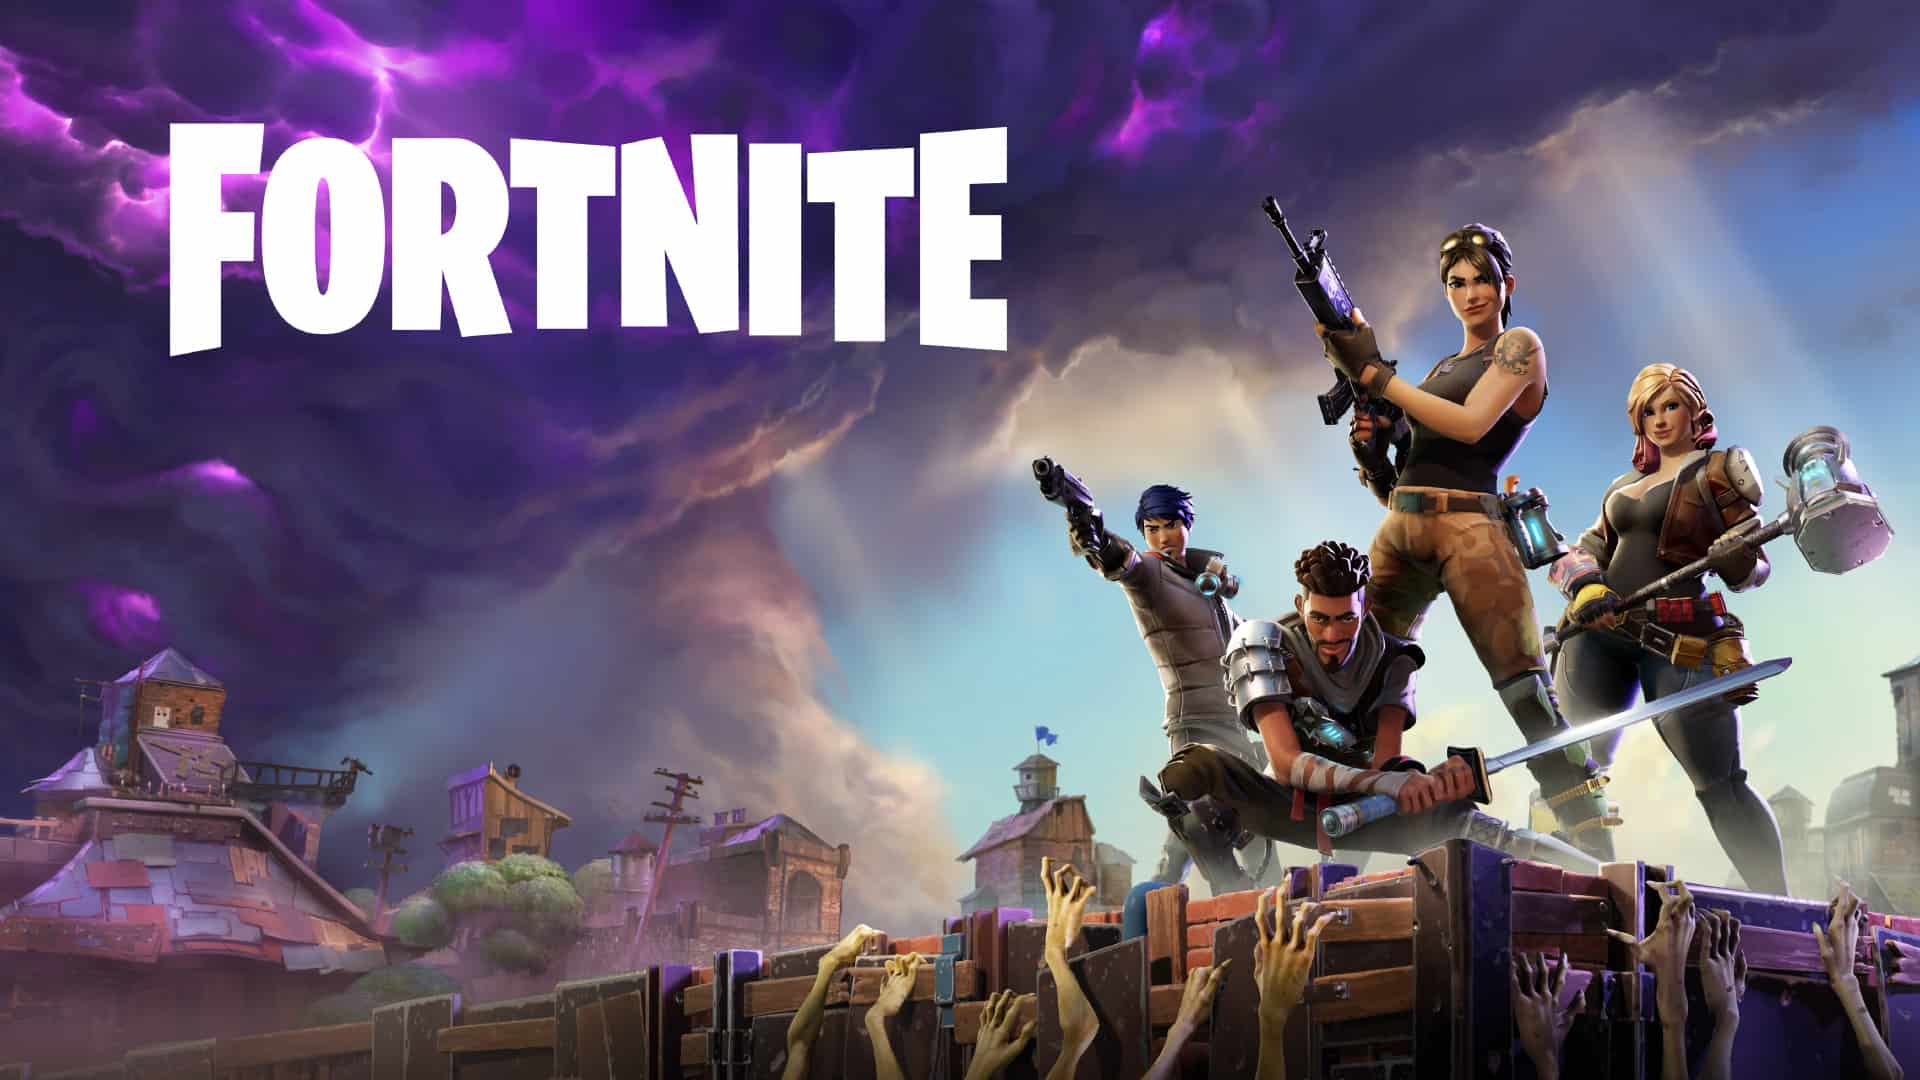 spinonews Epic games announce Fortnite 2.4.2 update